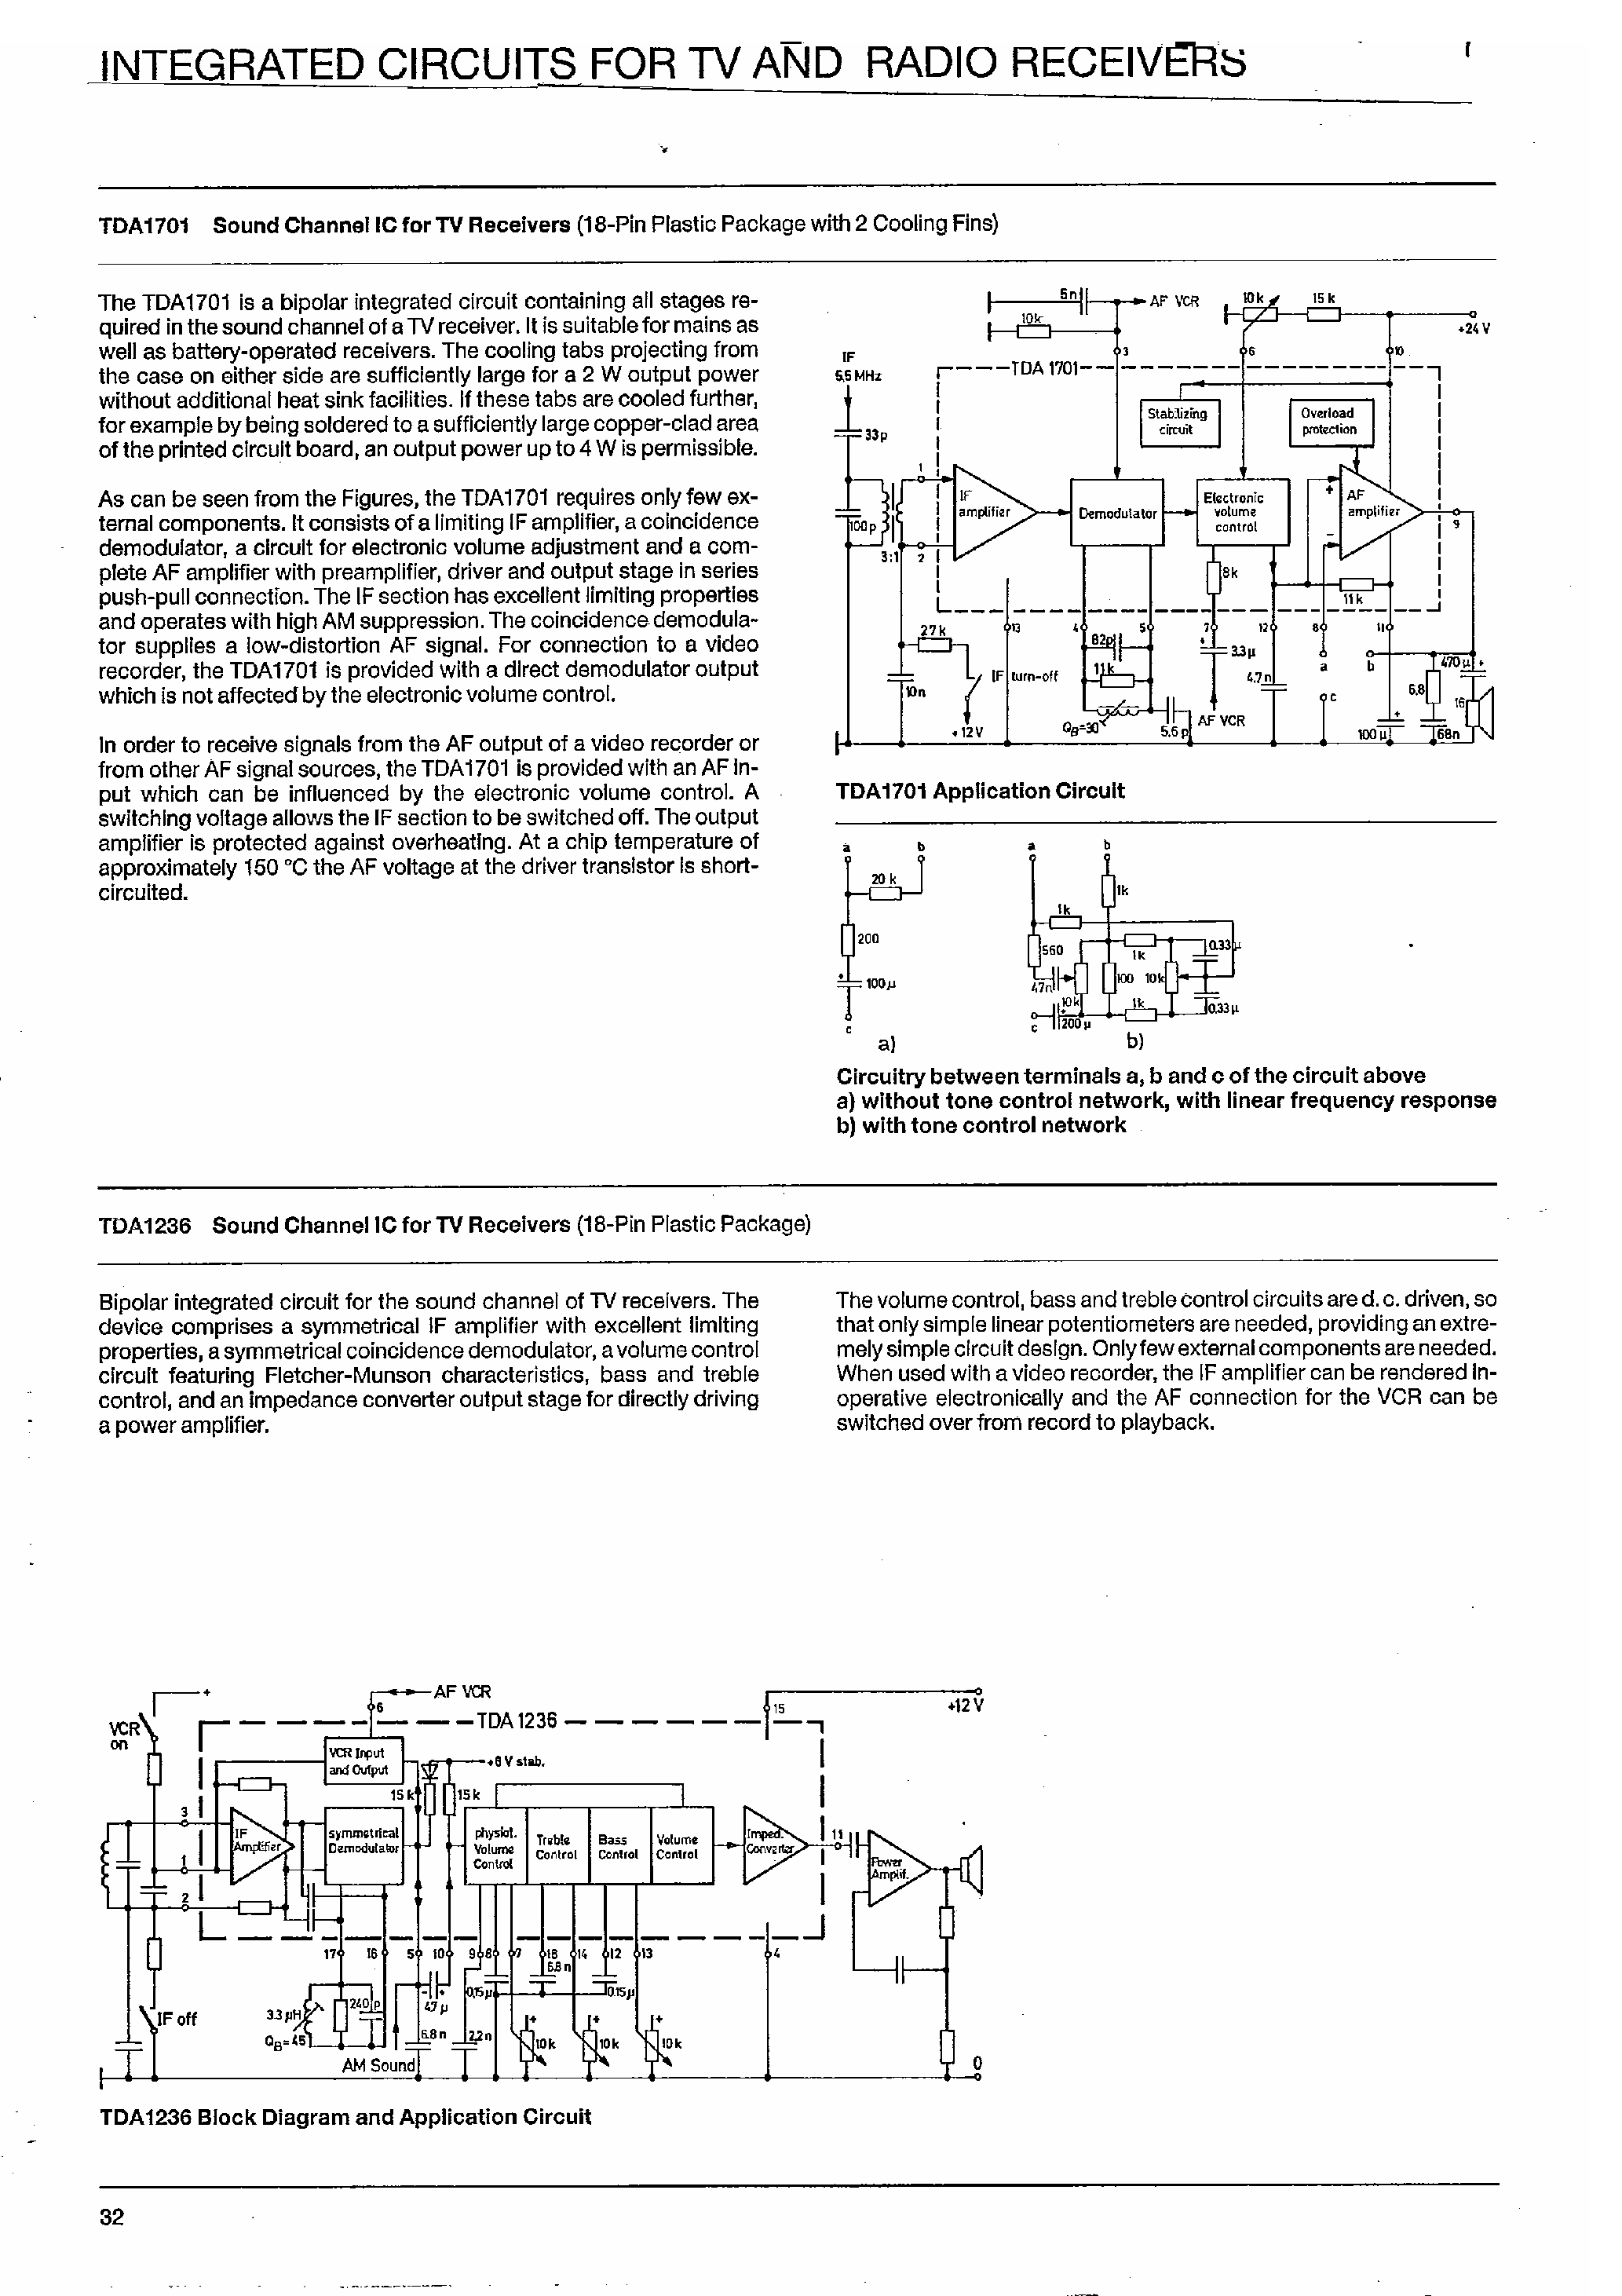 Datasheet TEA1009 - Integrated Circuits for TV and Radio Receivers page 1